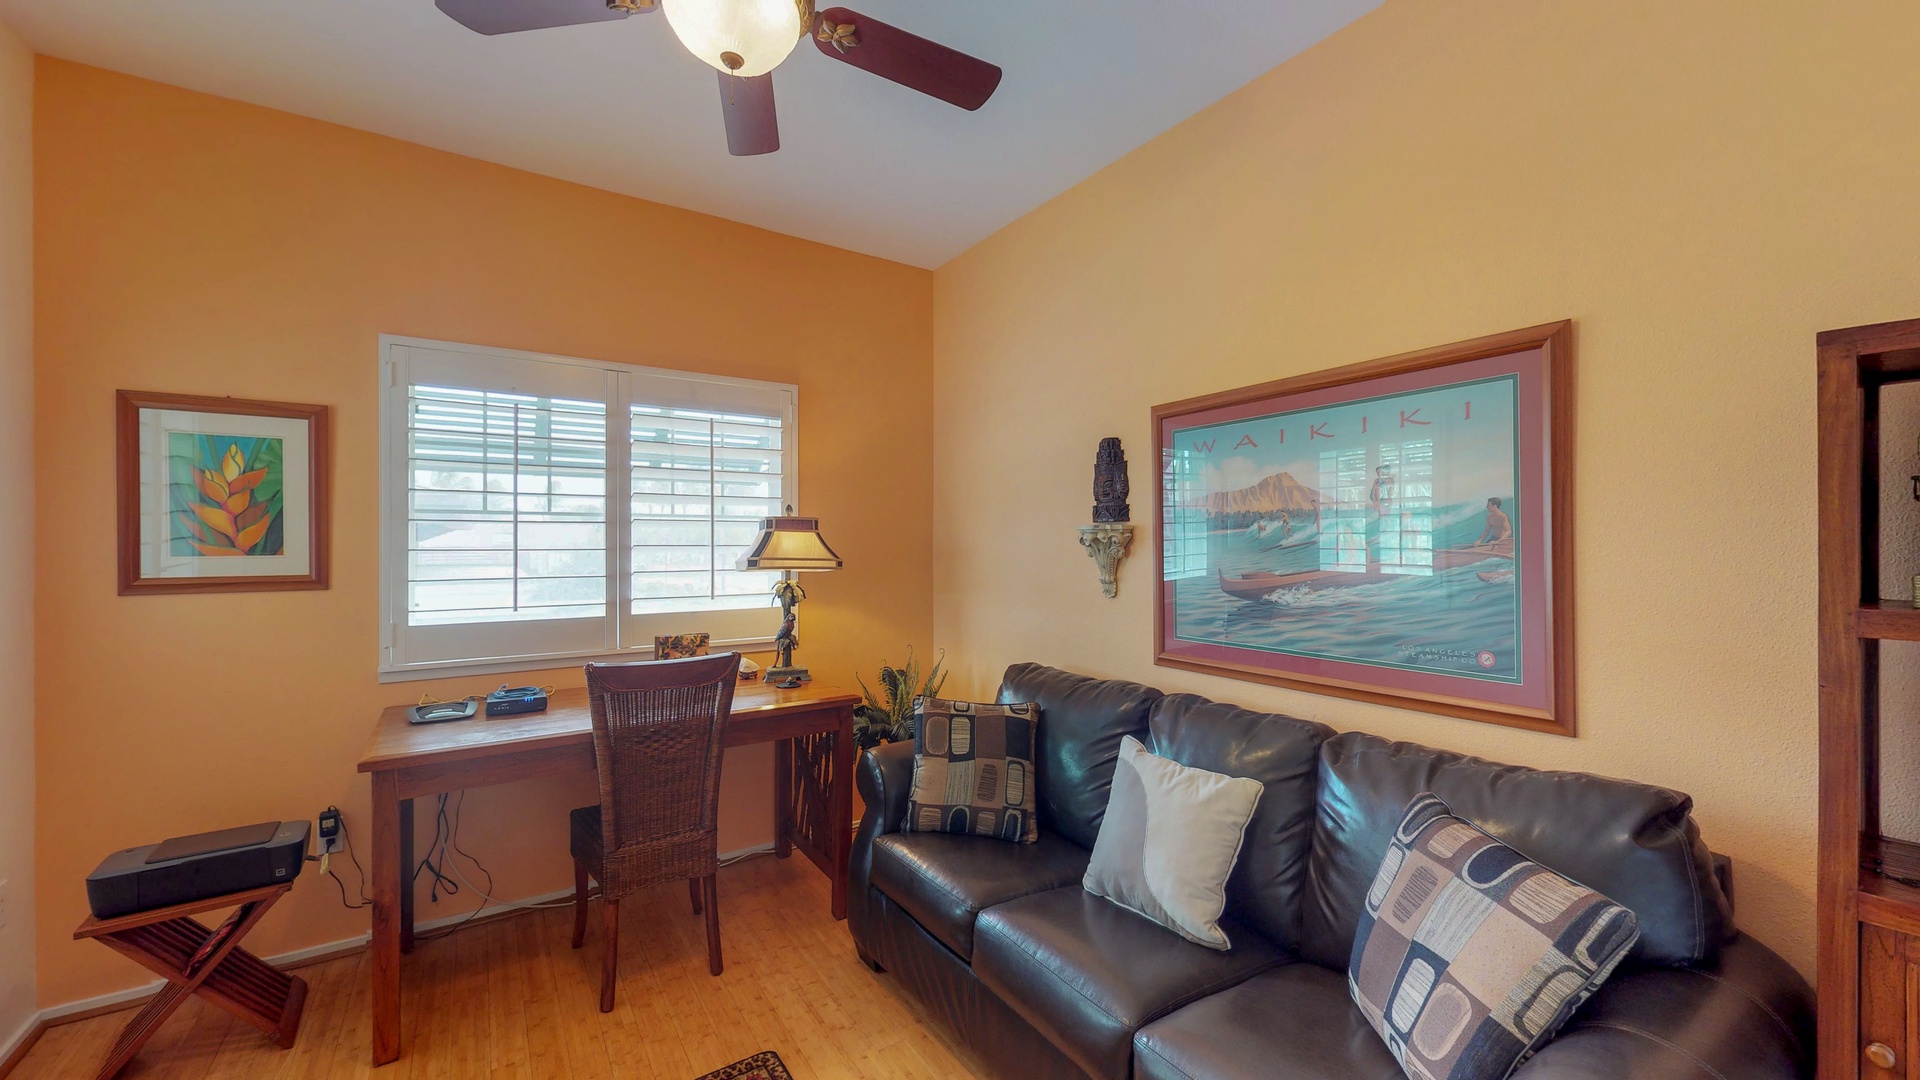 Kapolei Vacation Rentals, Coconut Plantation 1080-1 - The upstairs den has desk and sofa bed.